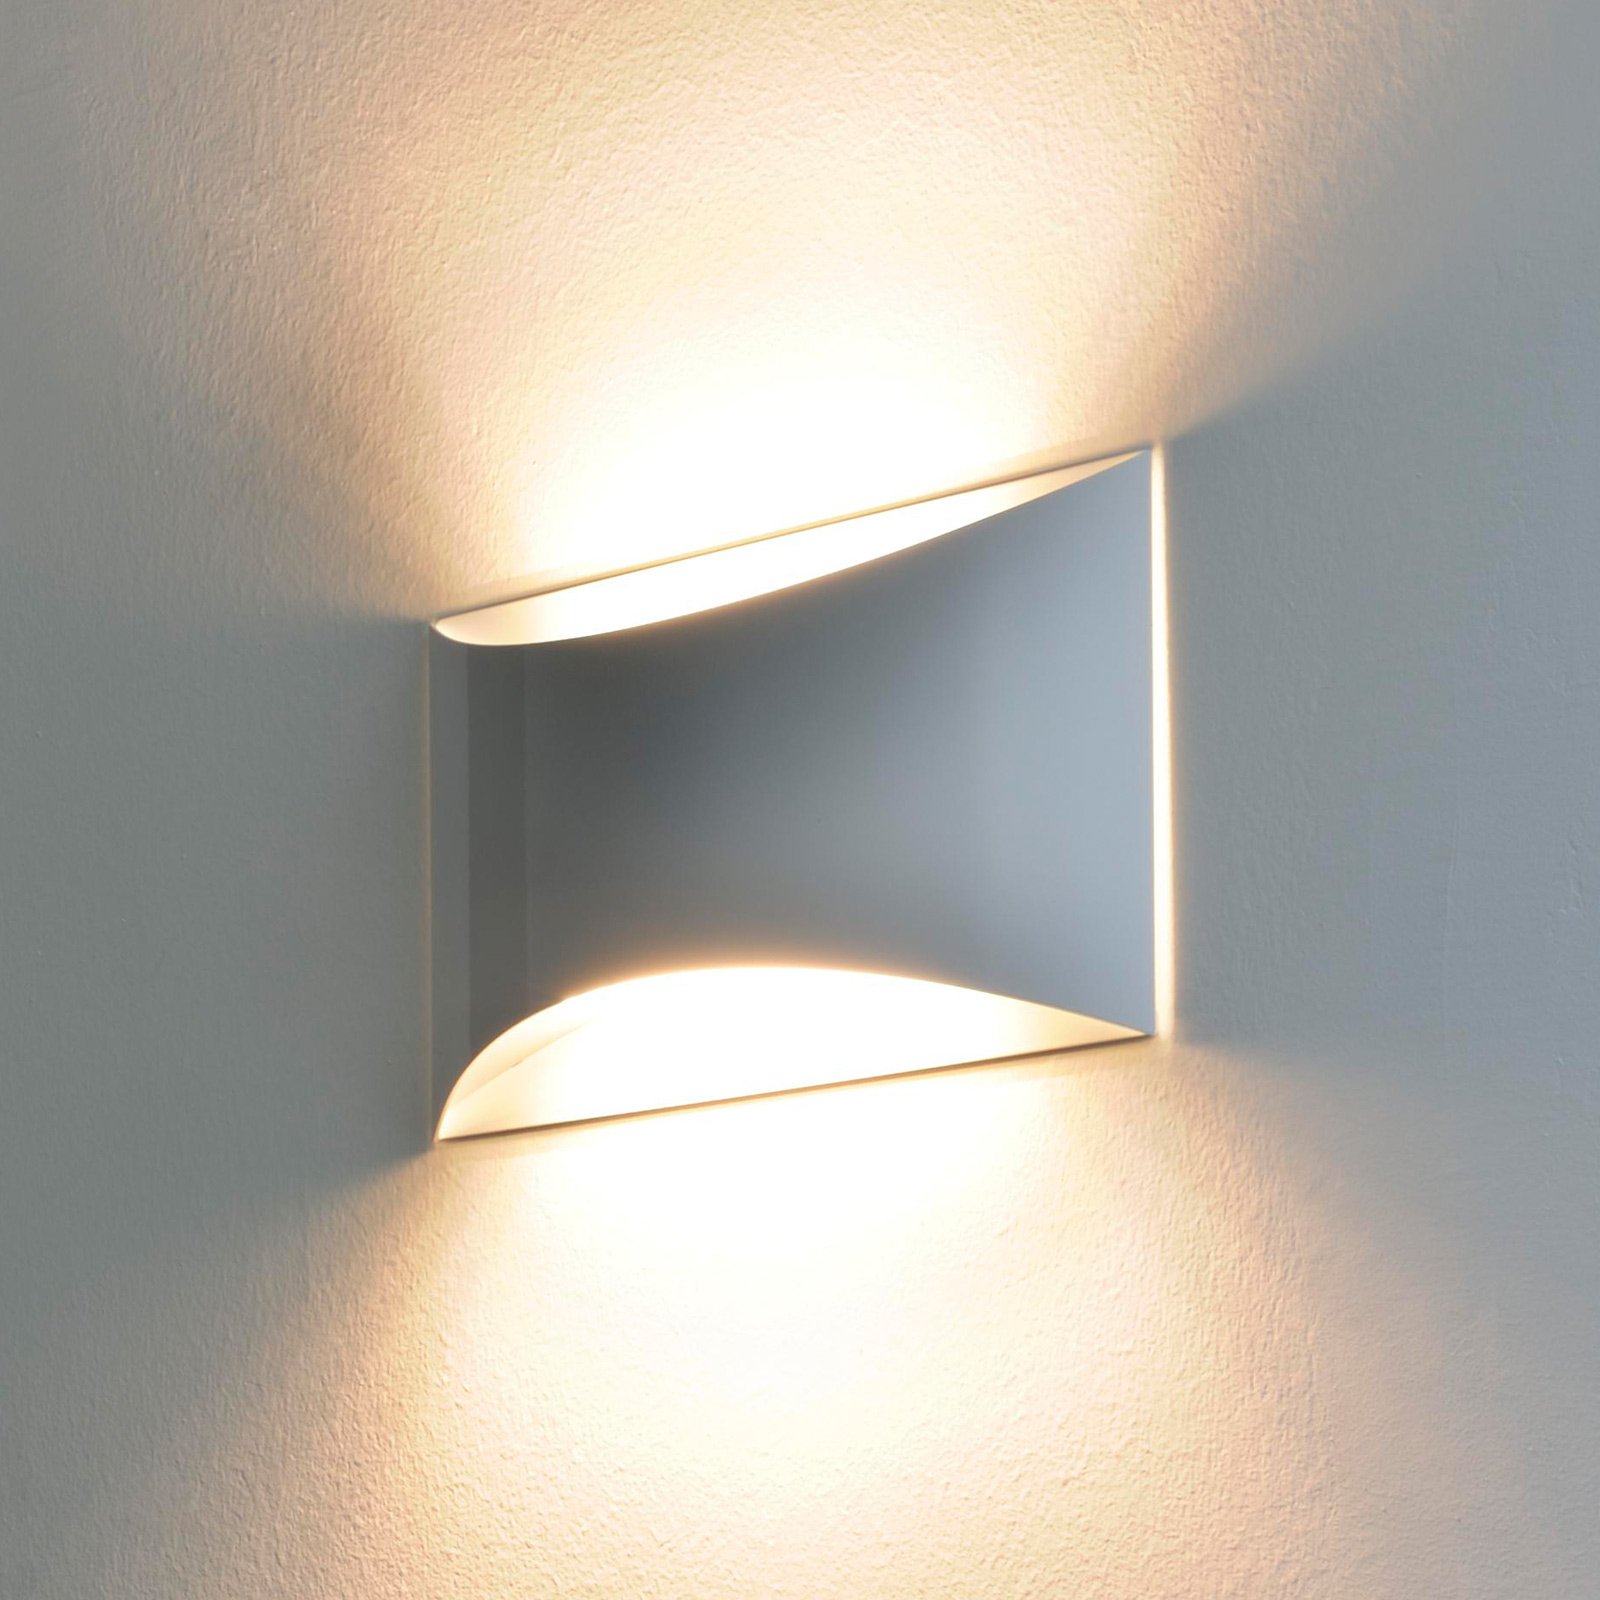 Oluce Kelly applique LED con up/downlight